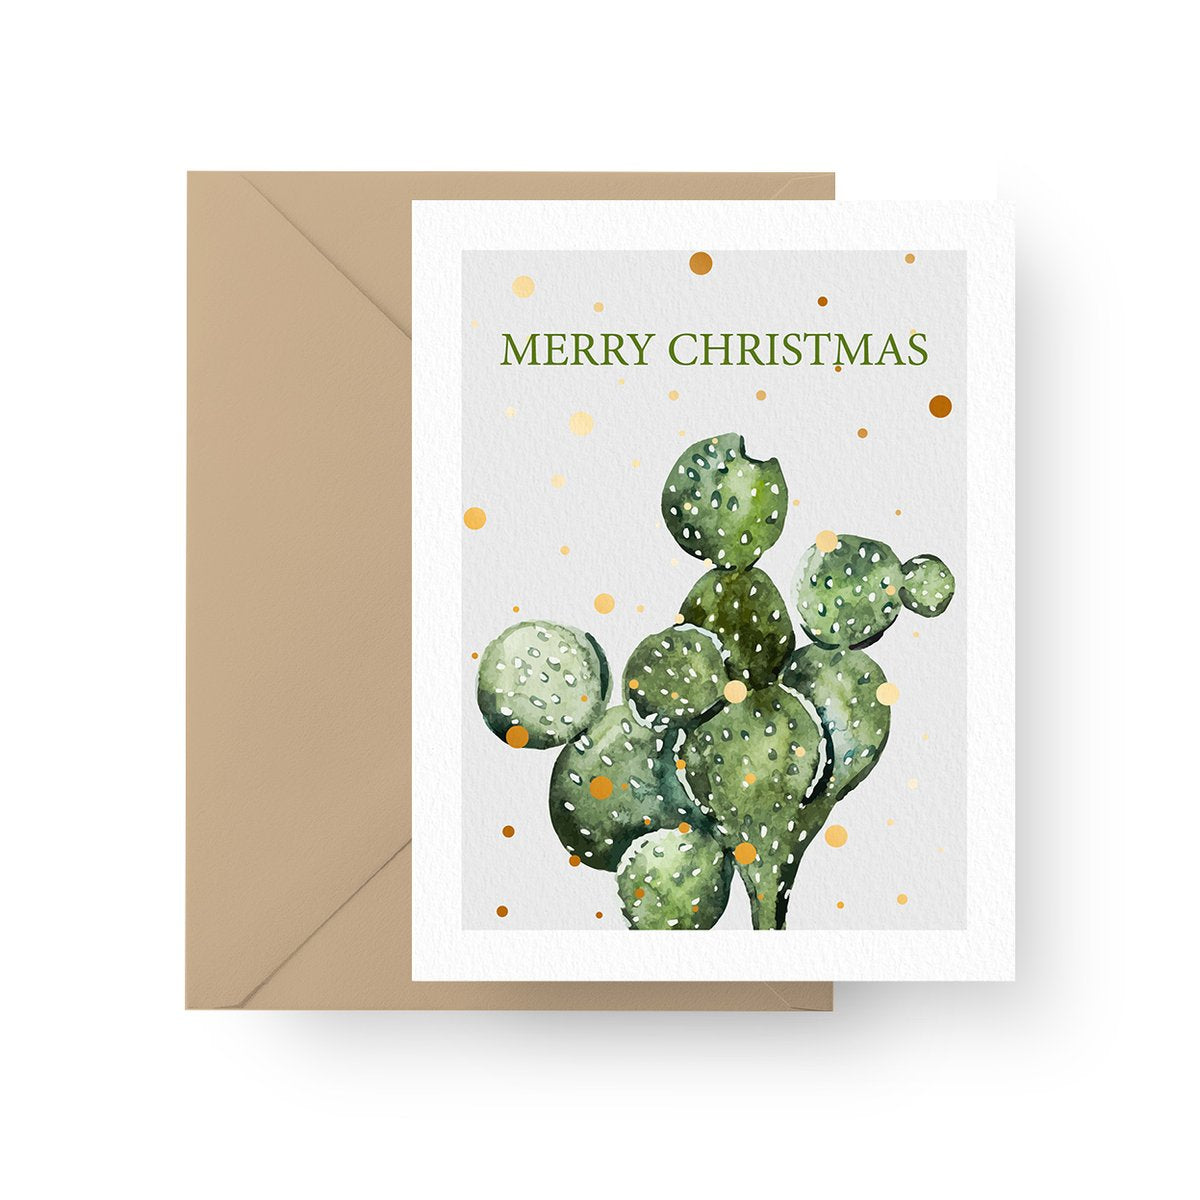 Christmas Cards 2021, Holiday Cards, Personalized Christmas cards 2021, Unique Christmas Cards by Succulents Box, The best places to buy holiday cards online in 2021, Christmas Succulents, Christmas Succulent Plants, Succulents for Christmas Ideas in 2021, Succulent Christmas Decorations, Succulent Christmas Gift Ideas, Christmas Gift Ideas for Succulent Lovers, Holiday Succulent Planter, Holiday Decorating with Succulents